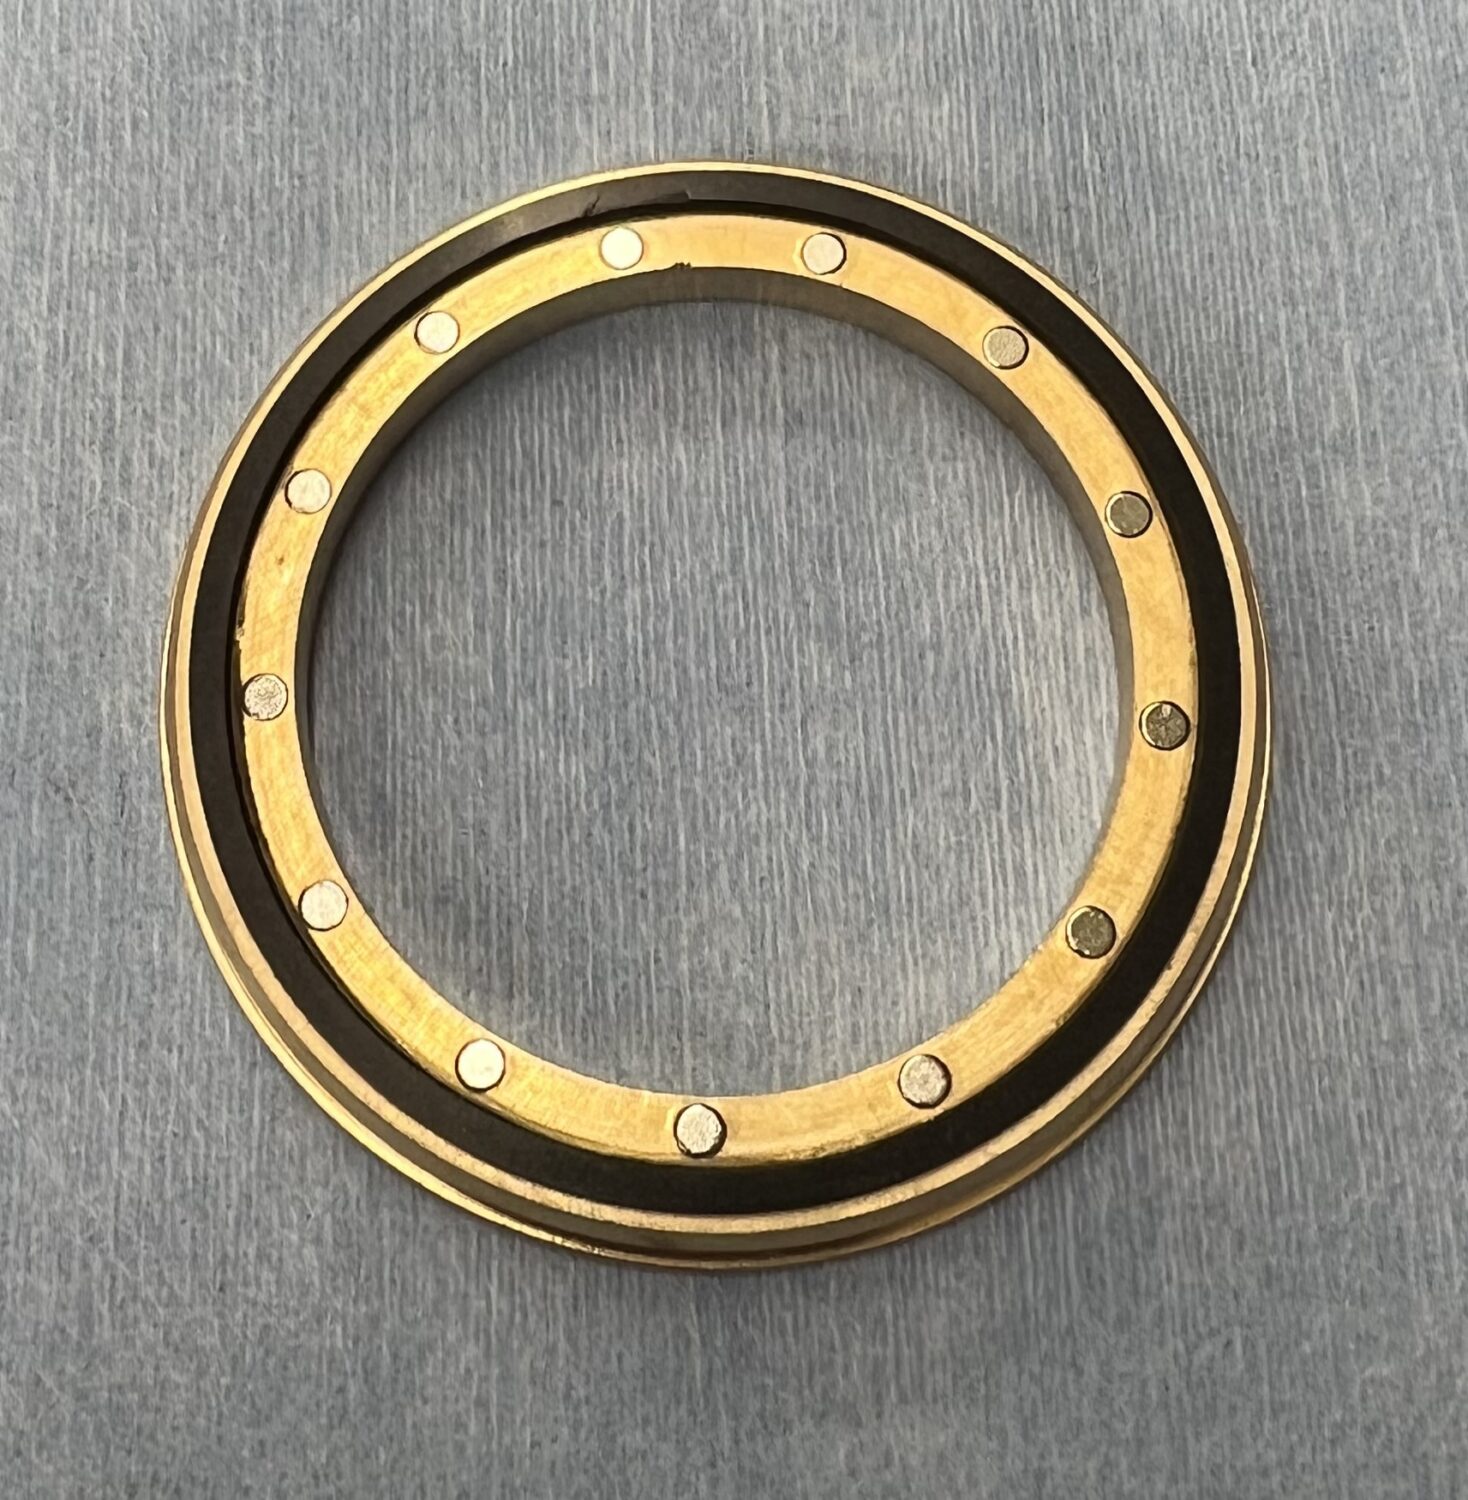 Magnetic Bearing Isolator with Carbon Face